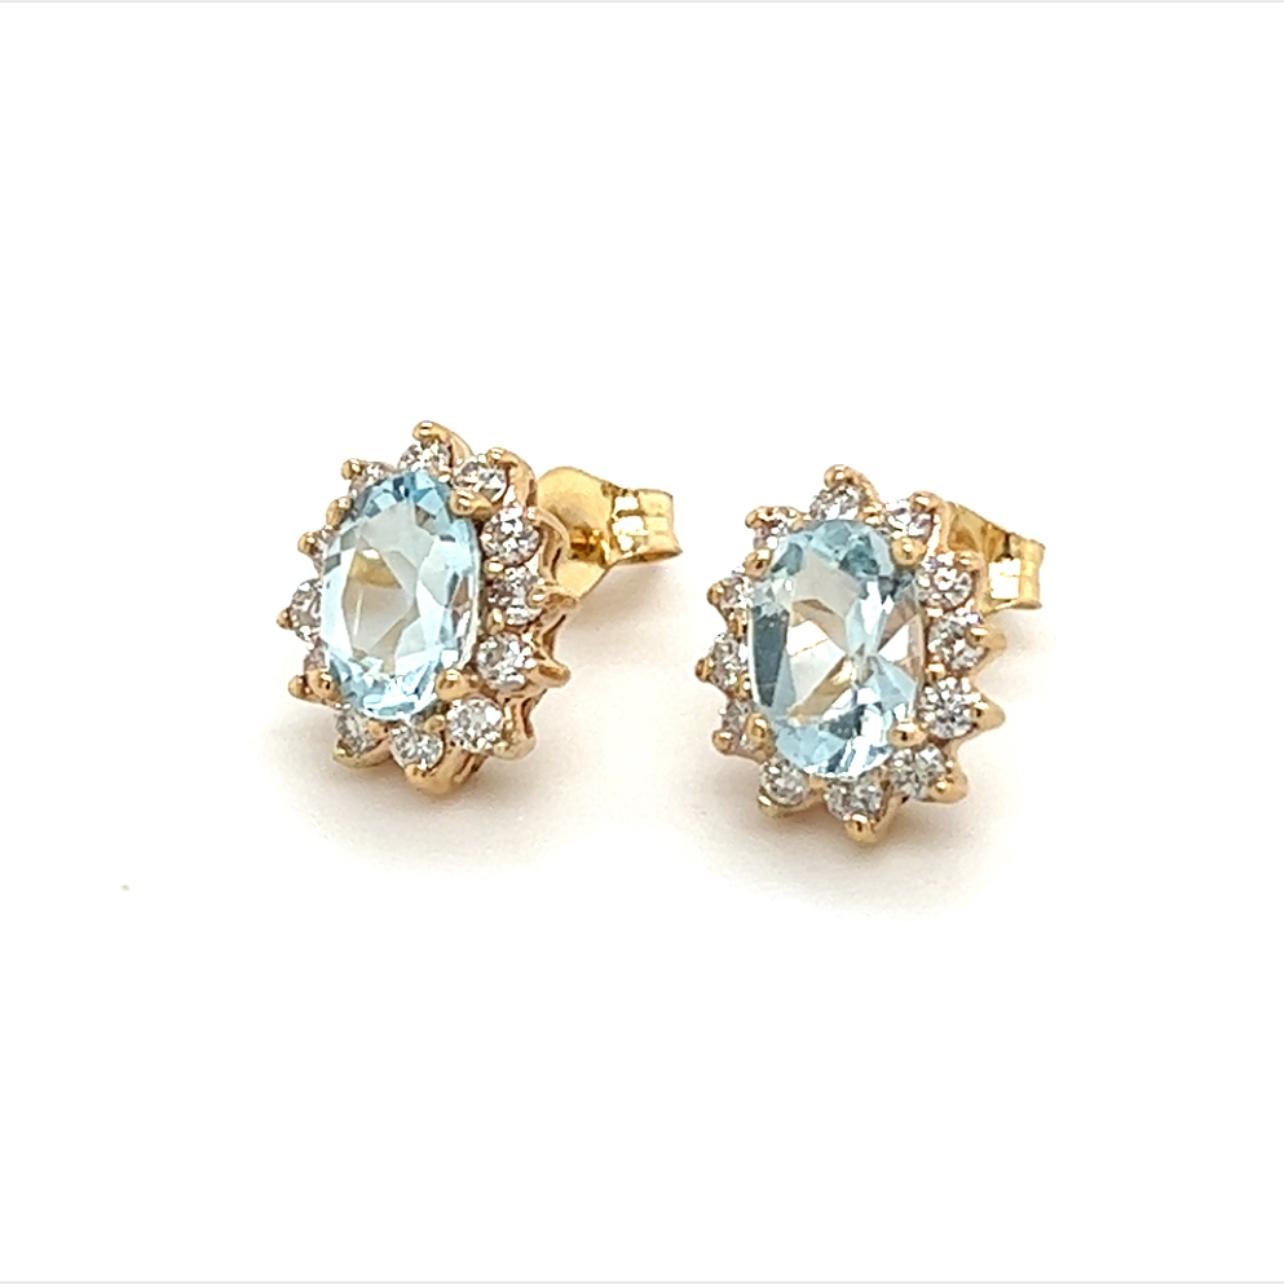 Natural Aquamarine Diamond Earrings 14k Gold 1.94 TCW Certified $3,950 211186

This is a Unique Custom Made Glamorous Piece of Jewelry!

Nothing says, “I Love you” more than Diamonds and Pearls!

These Aquamarine earrings have been Certified,